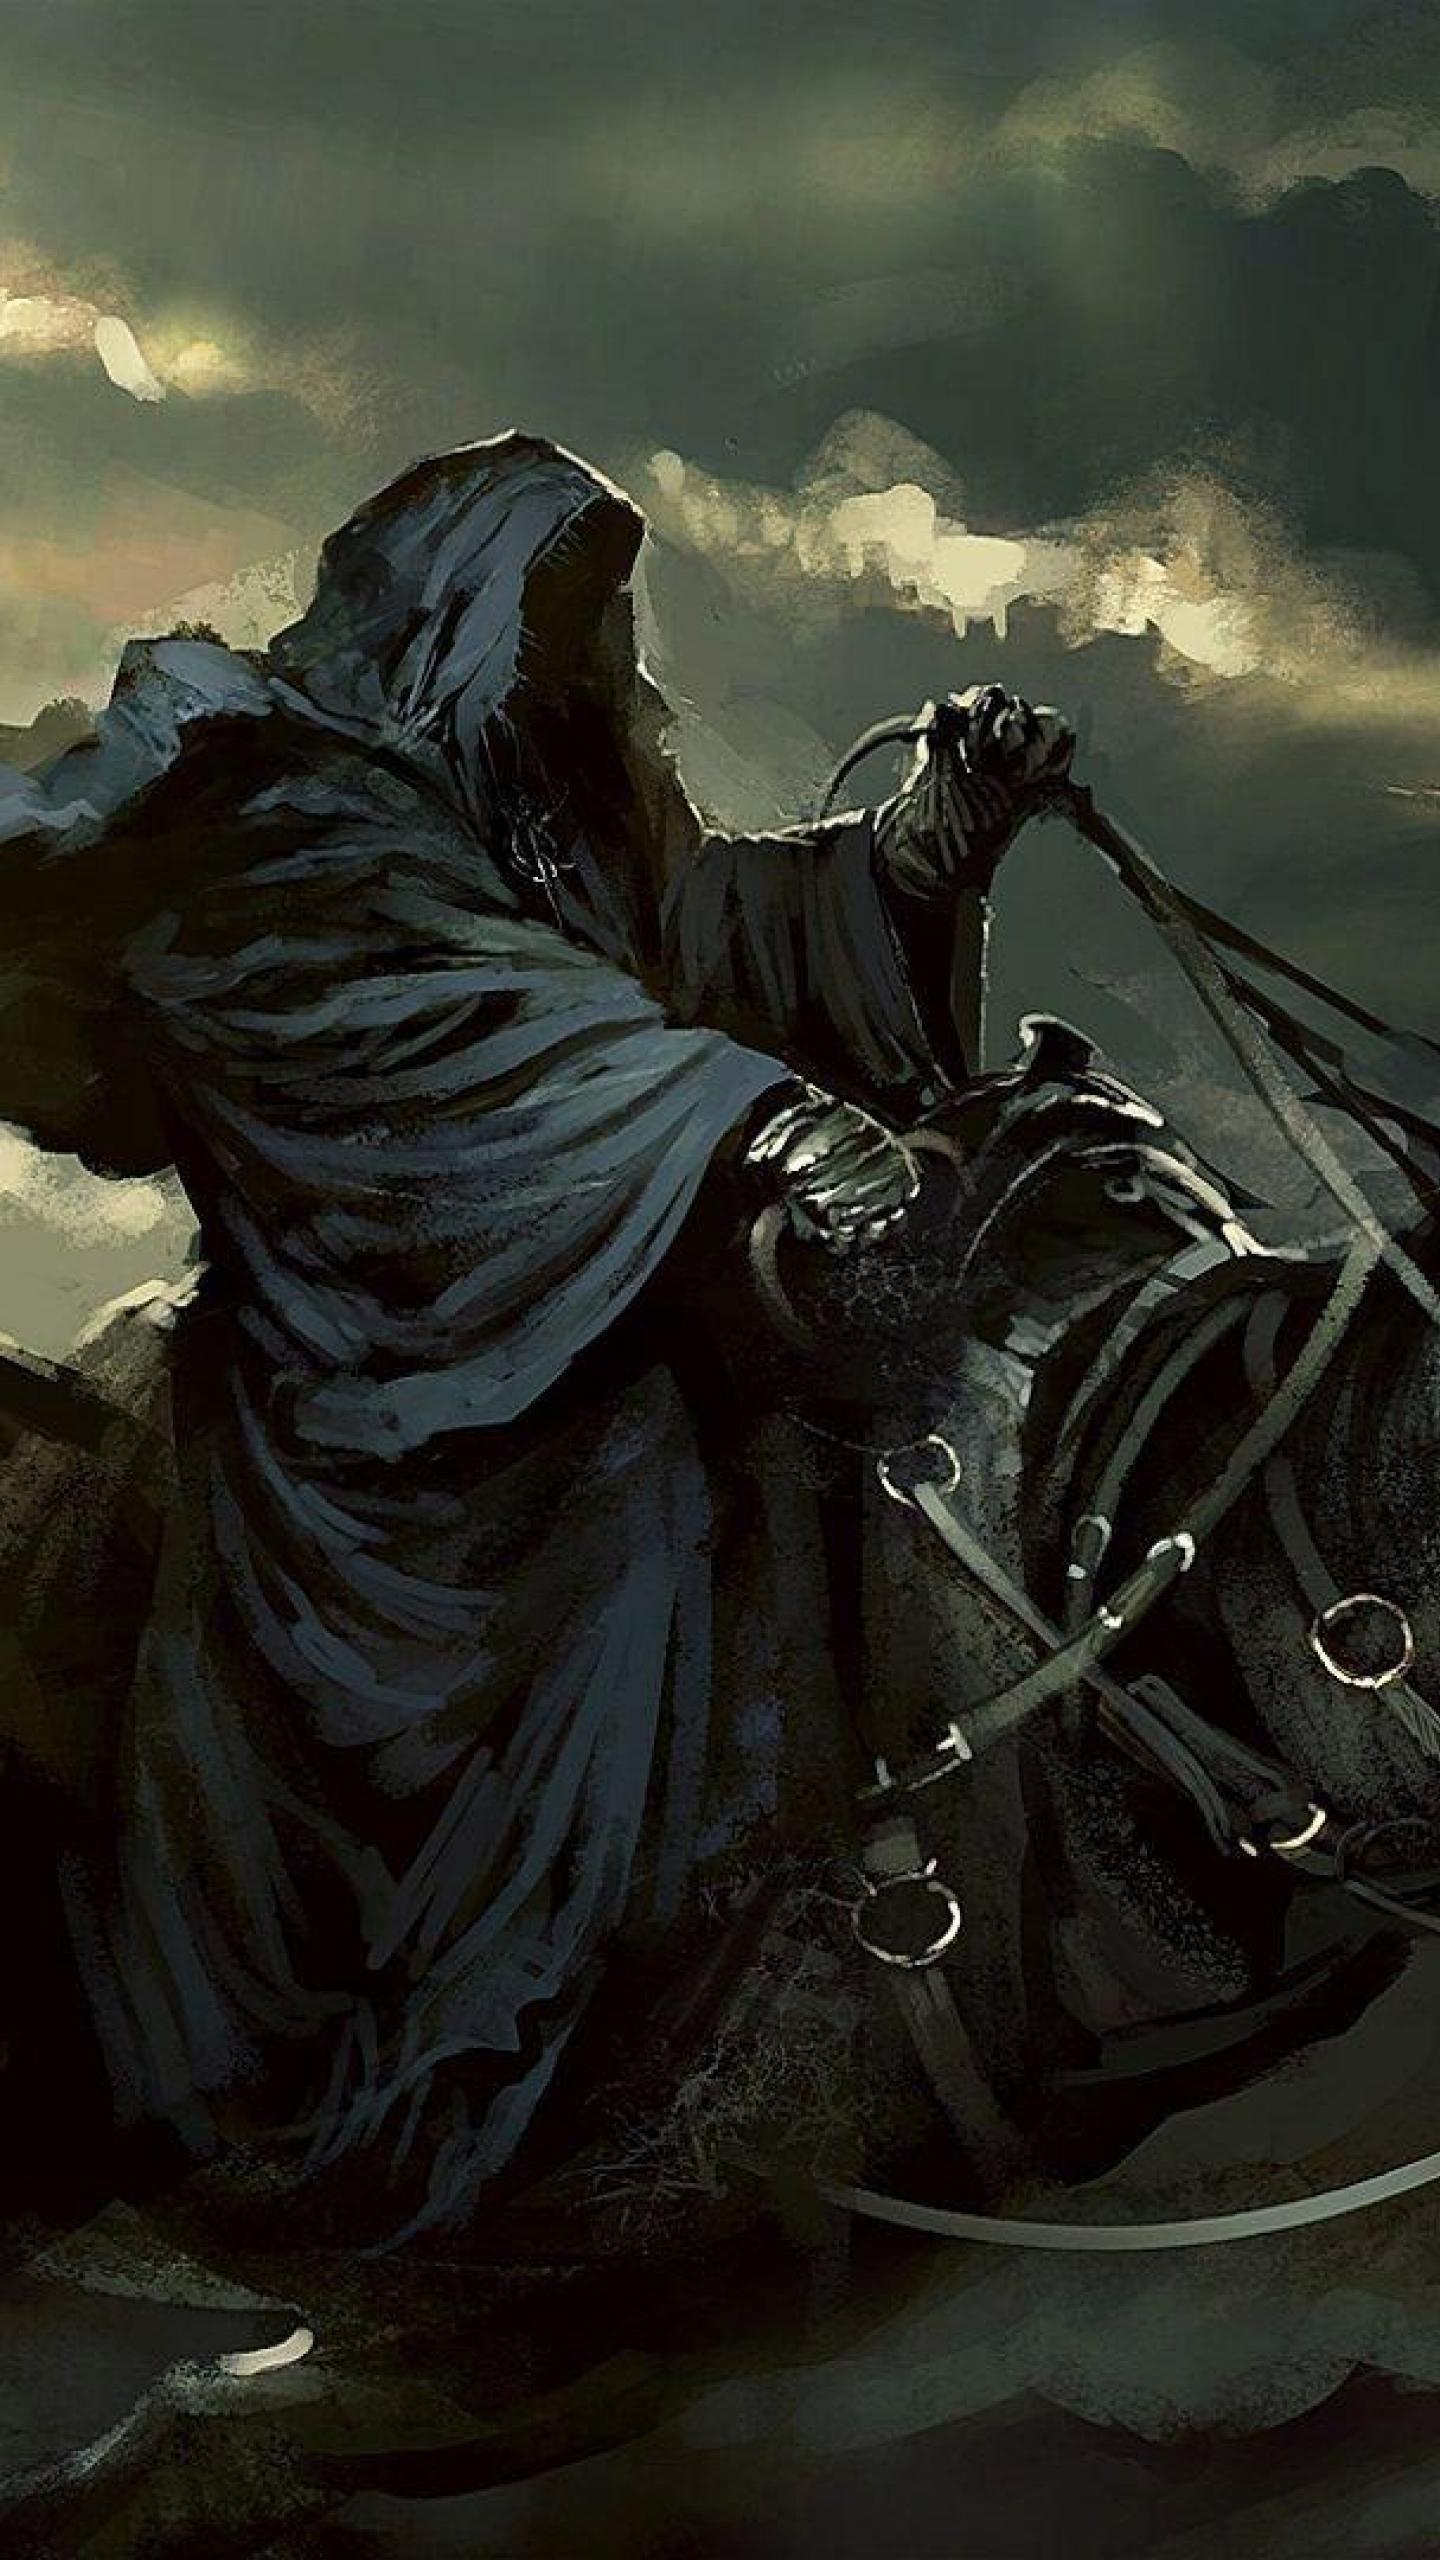 Free download LOTR Lord Rings of the Nazgul Movies Lord